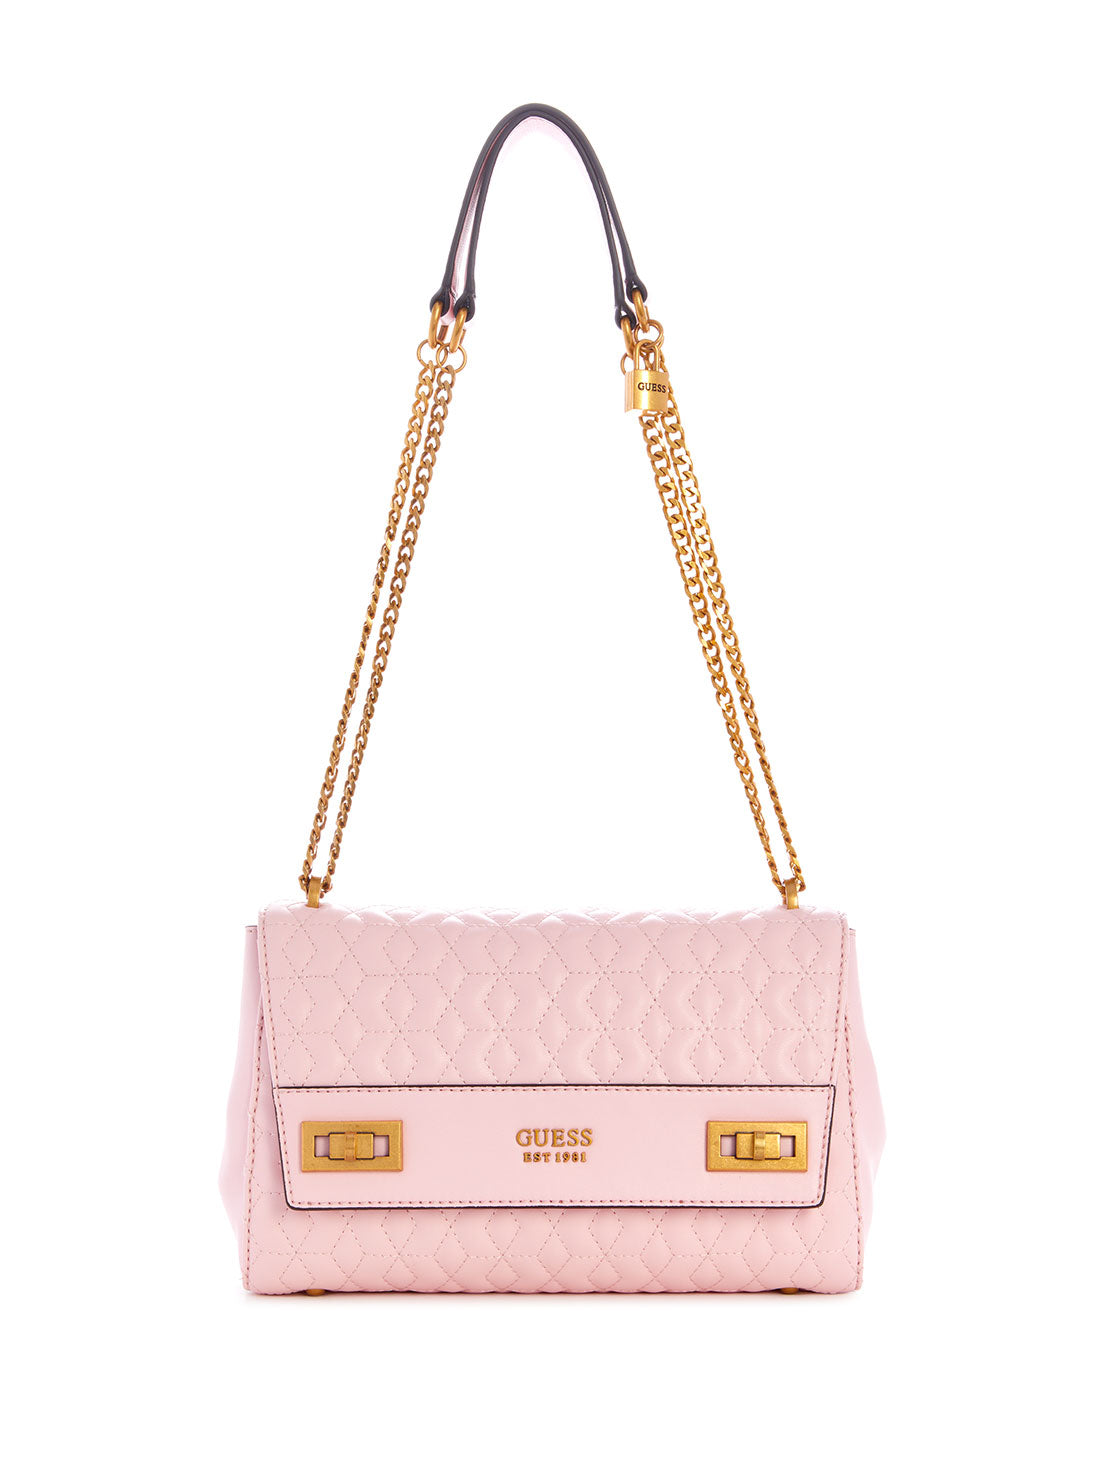 GUESS Women's Pink Katey Shoulder Bag DB787019 Front View